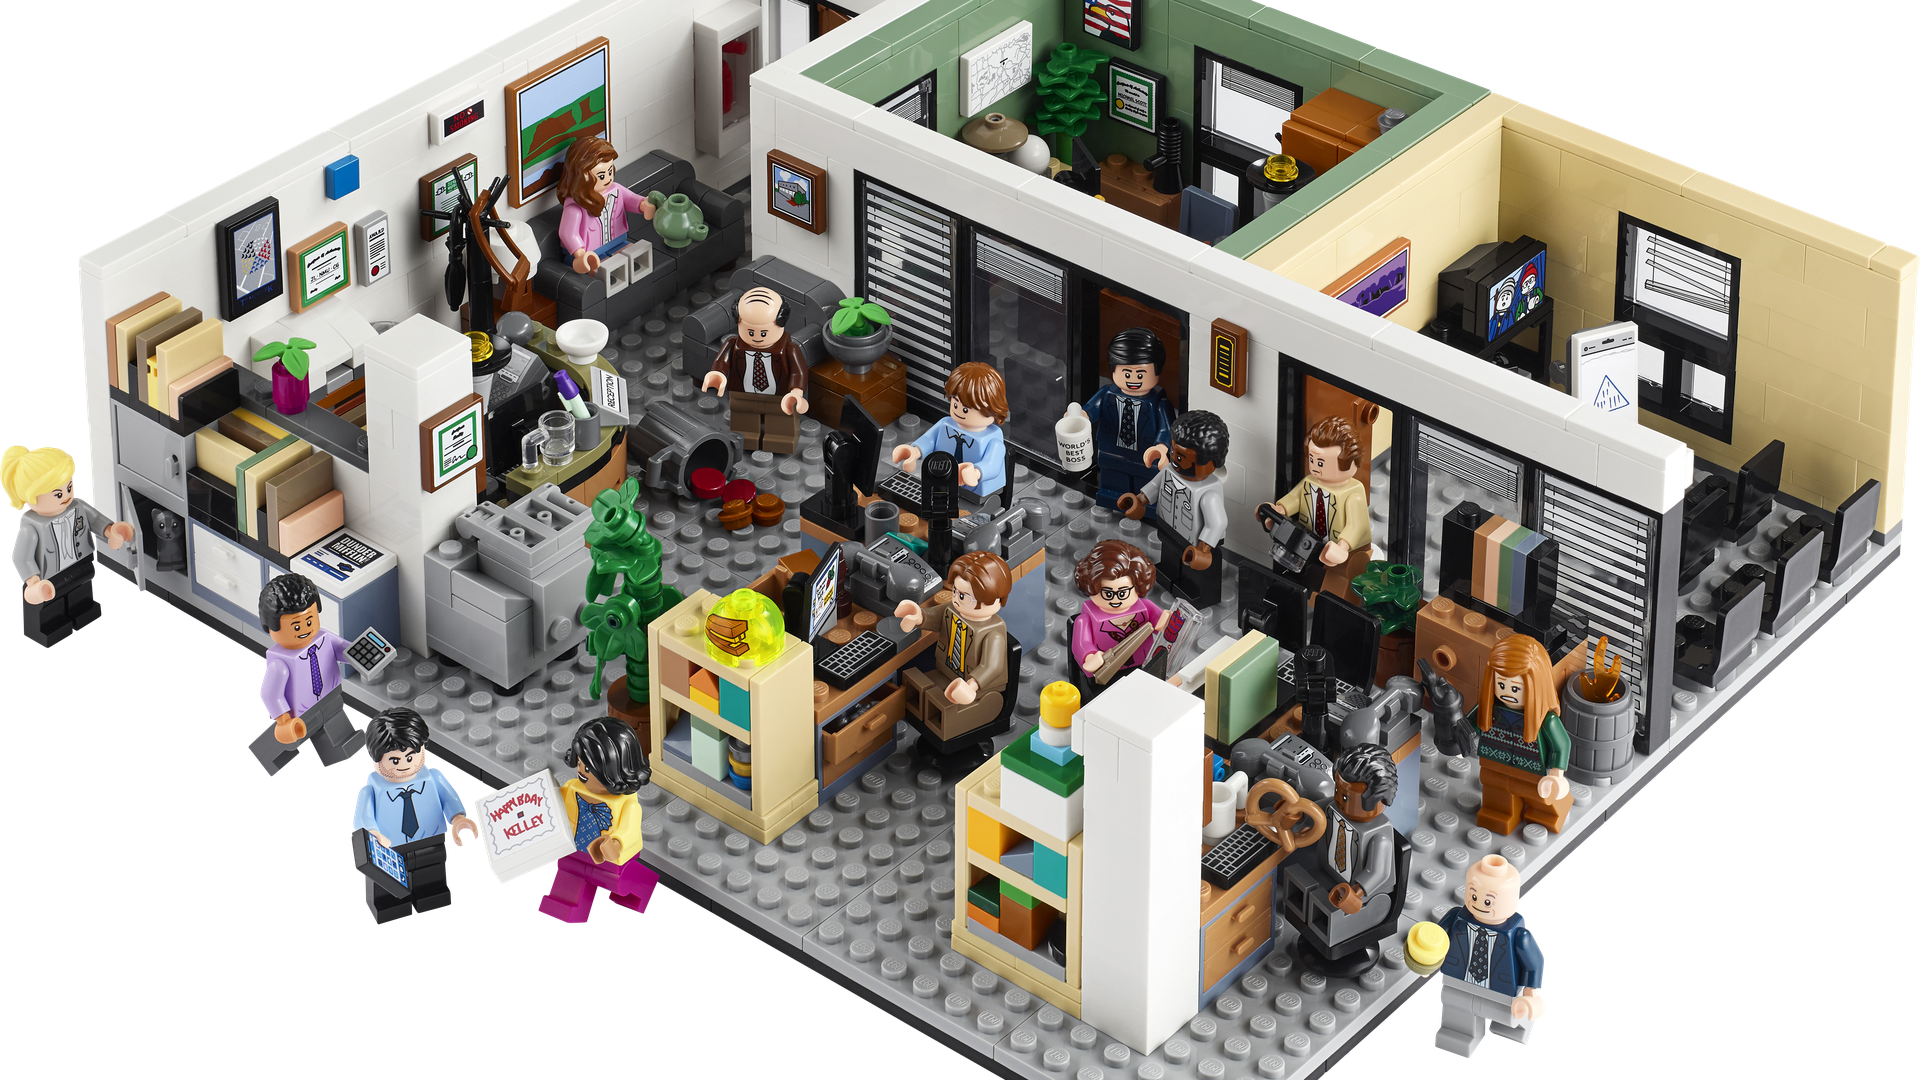 Lego's 'The Office' set.